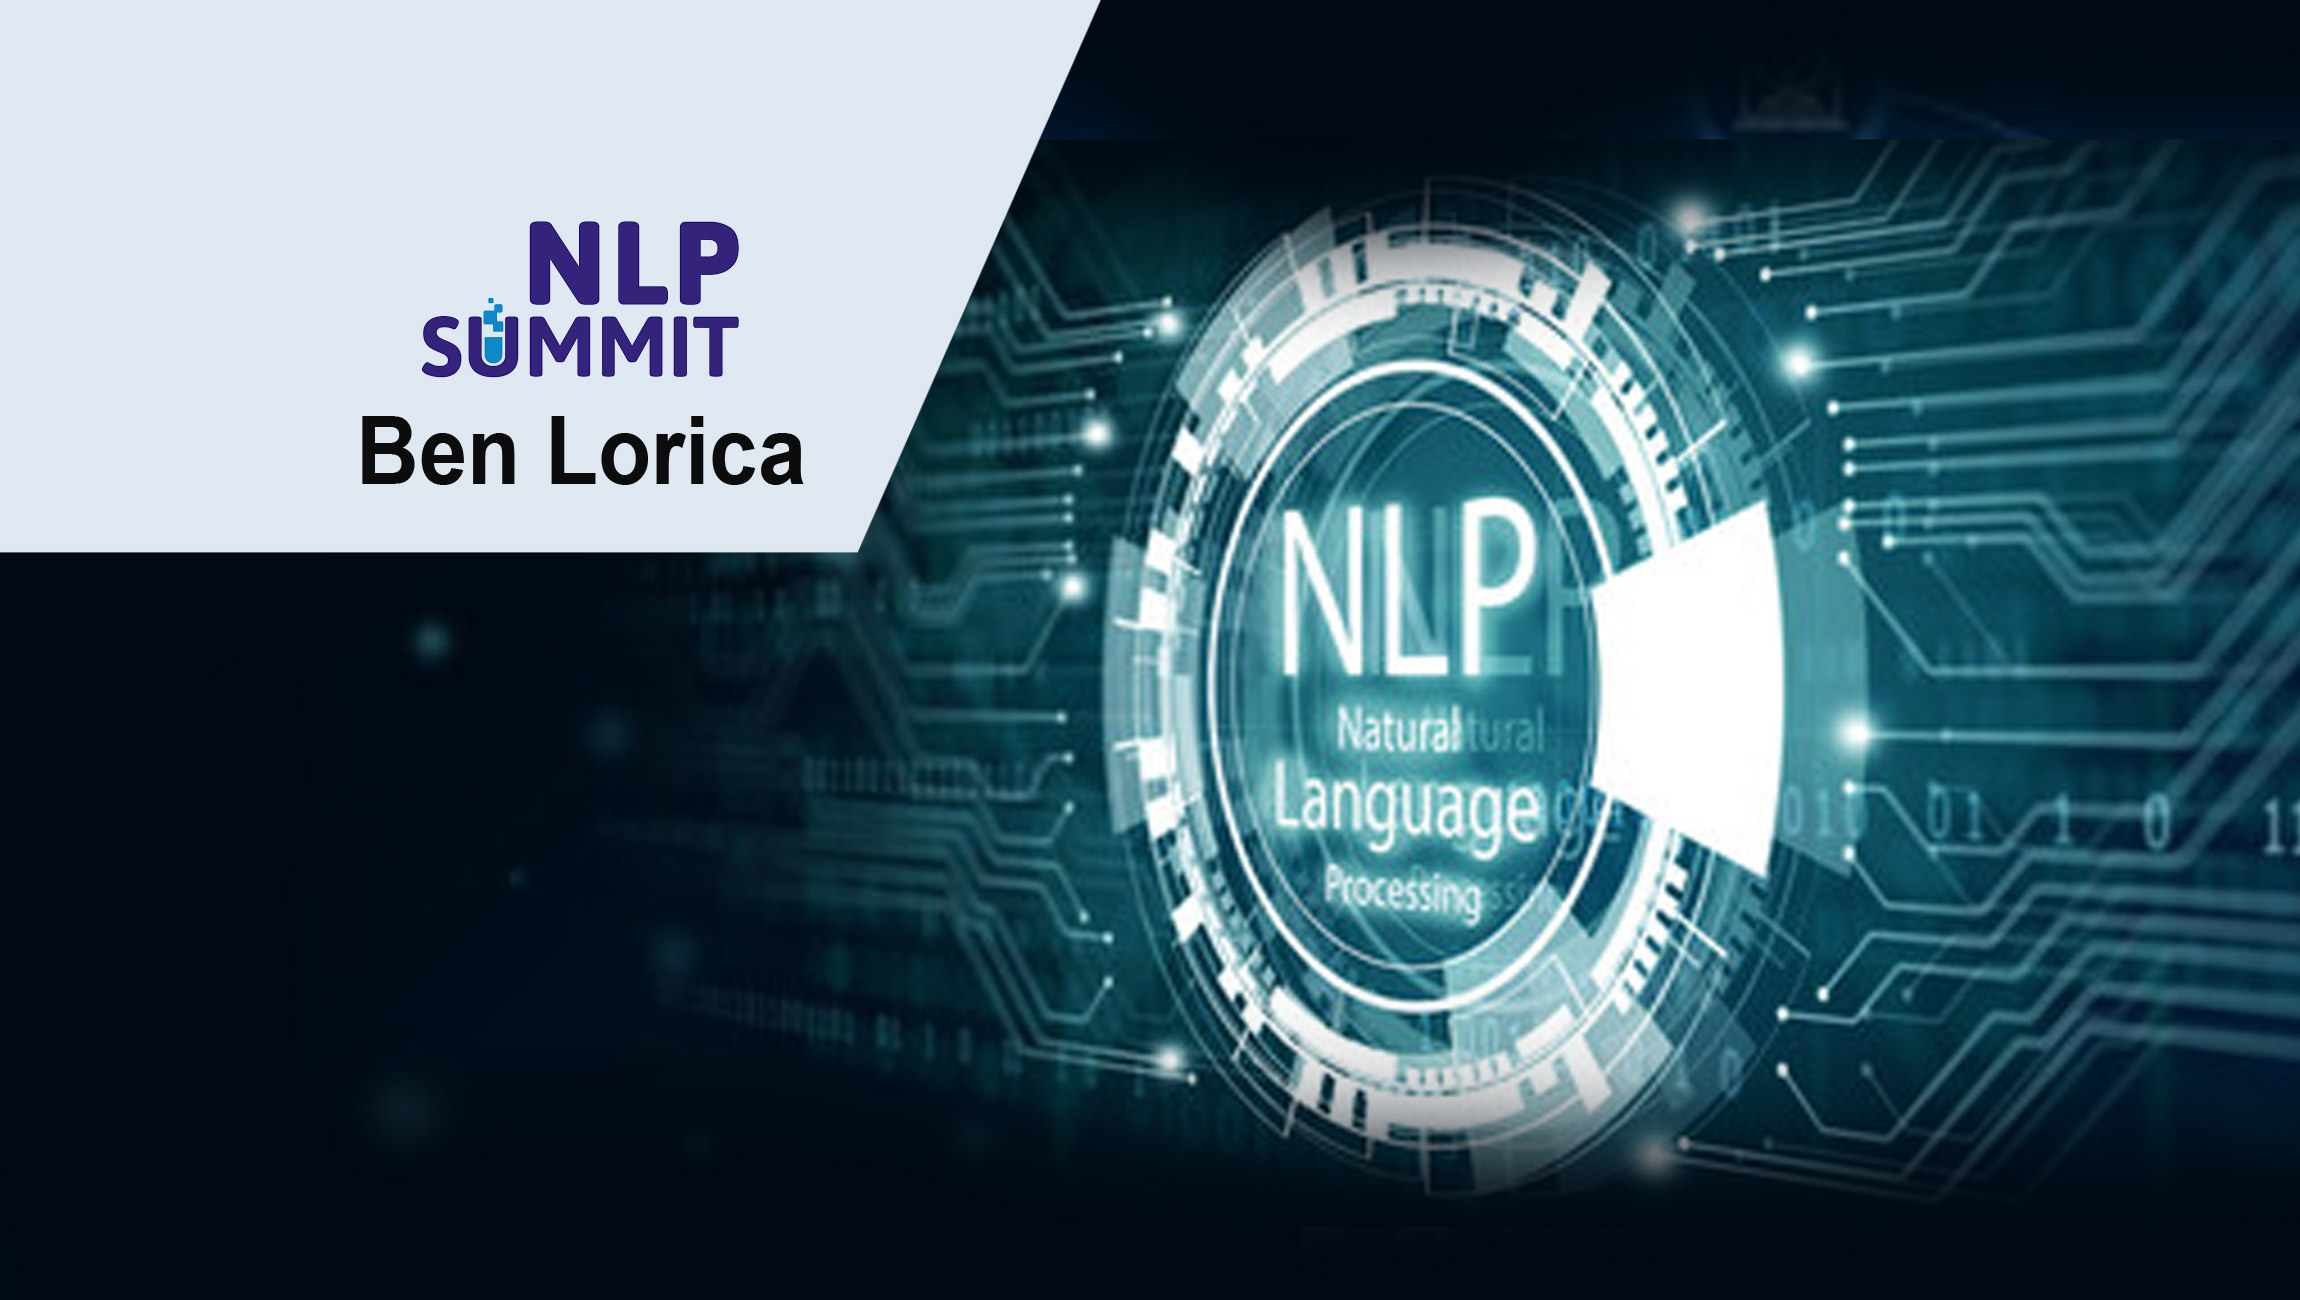 NLP Growth is Strong — These are the Trends Driving It